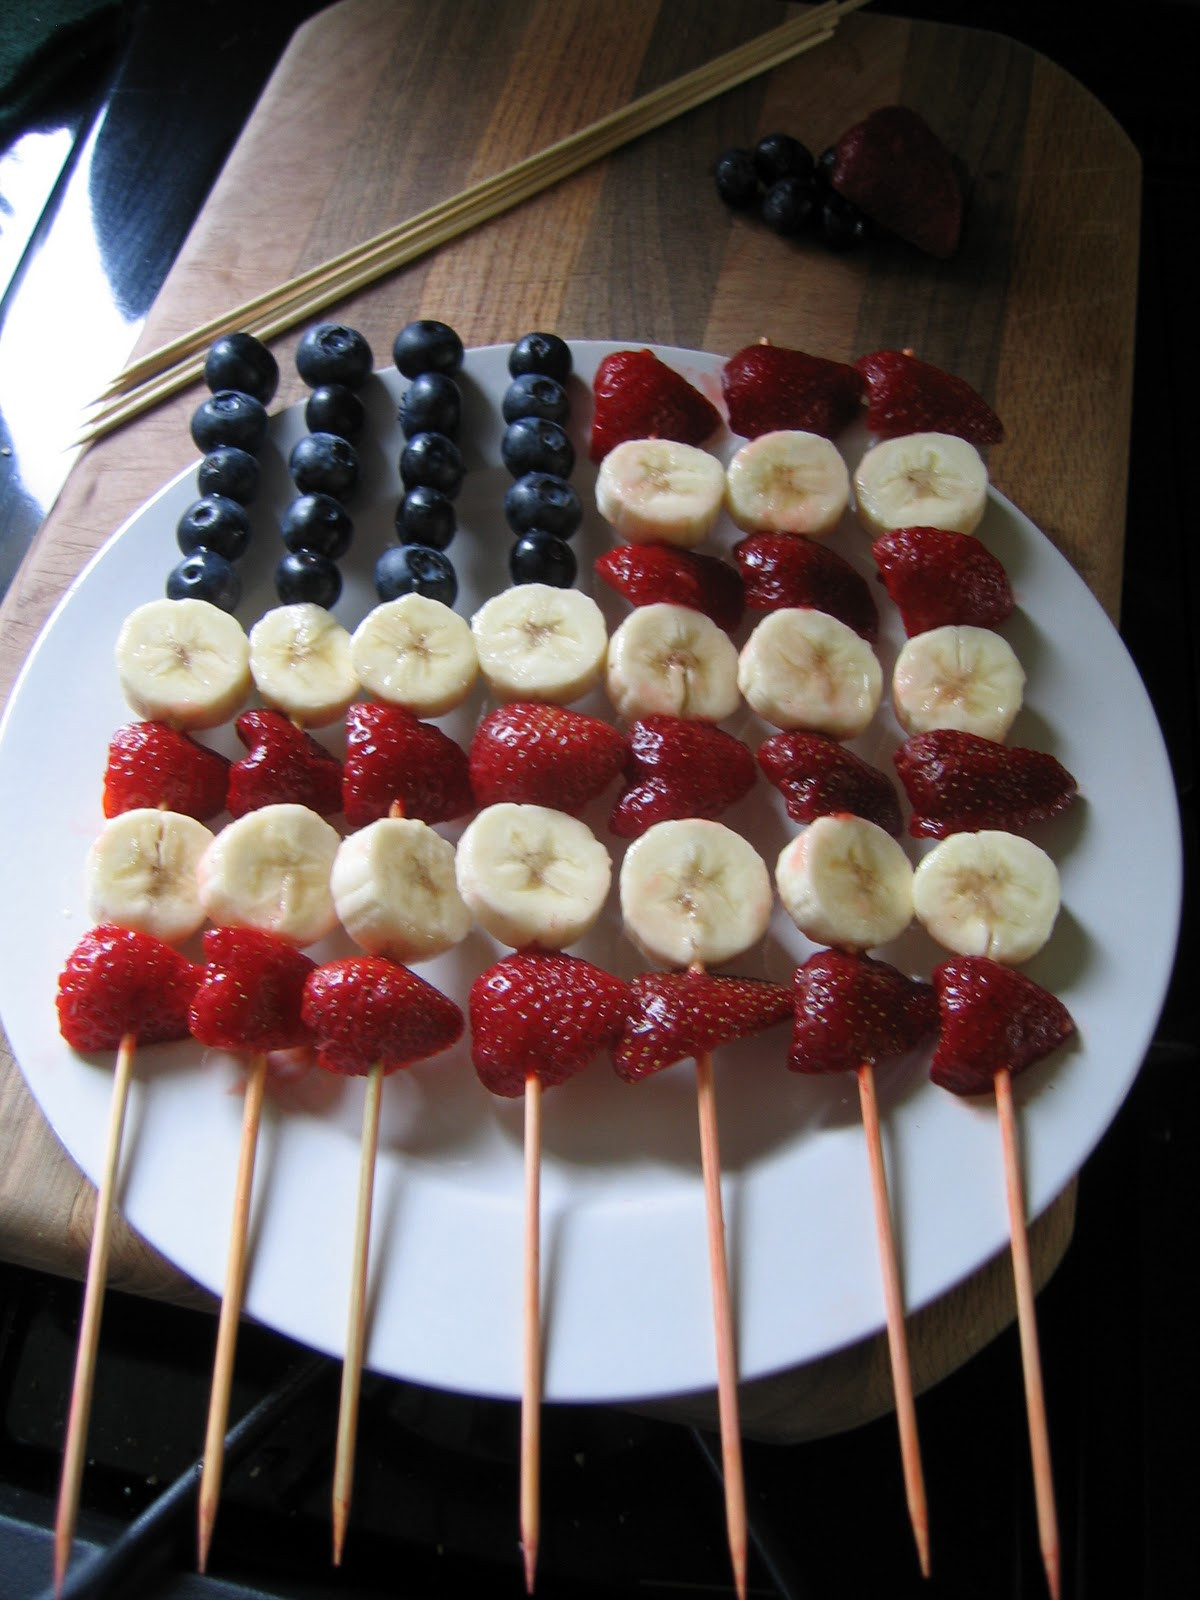 Food Ideas For 4th Of July Party
 Cute Food For Kids 4th of July Party Food Ideas